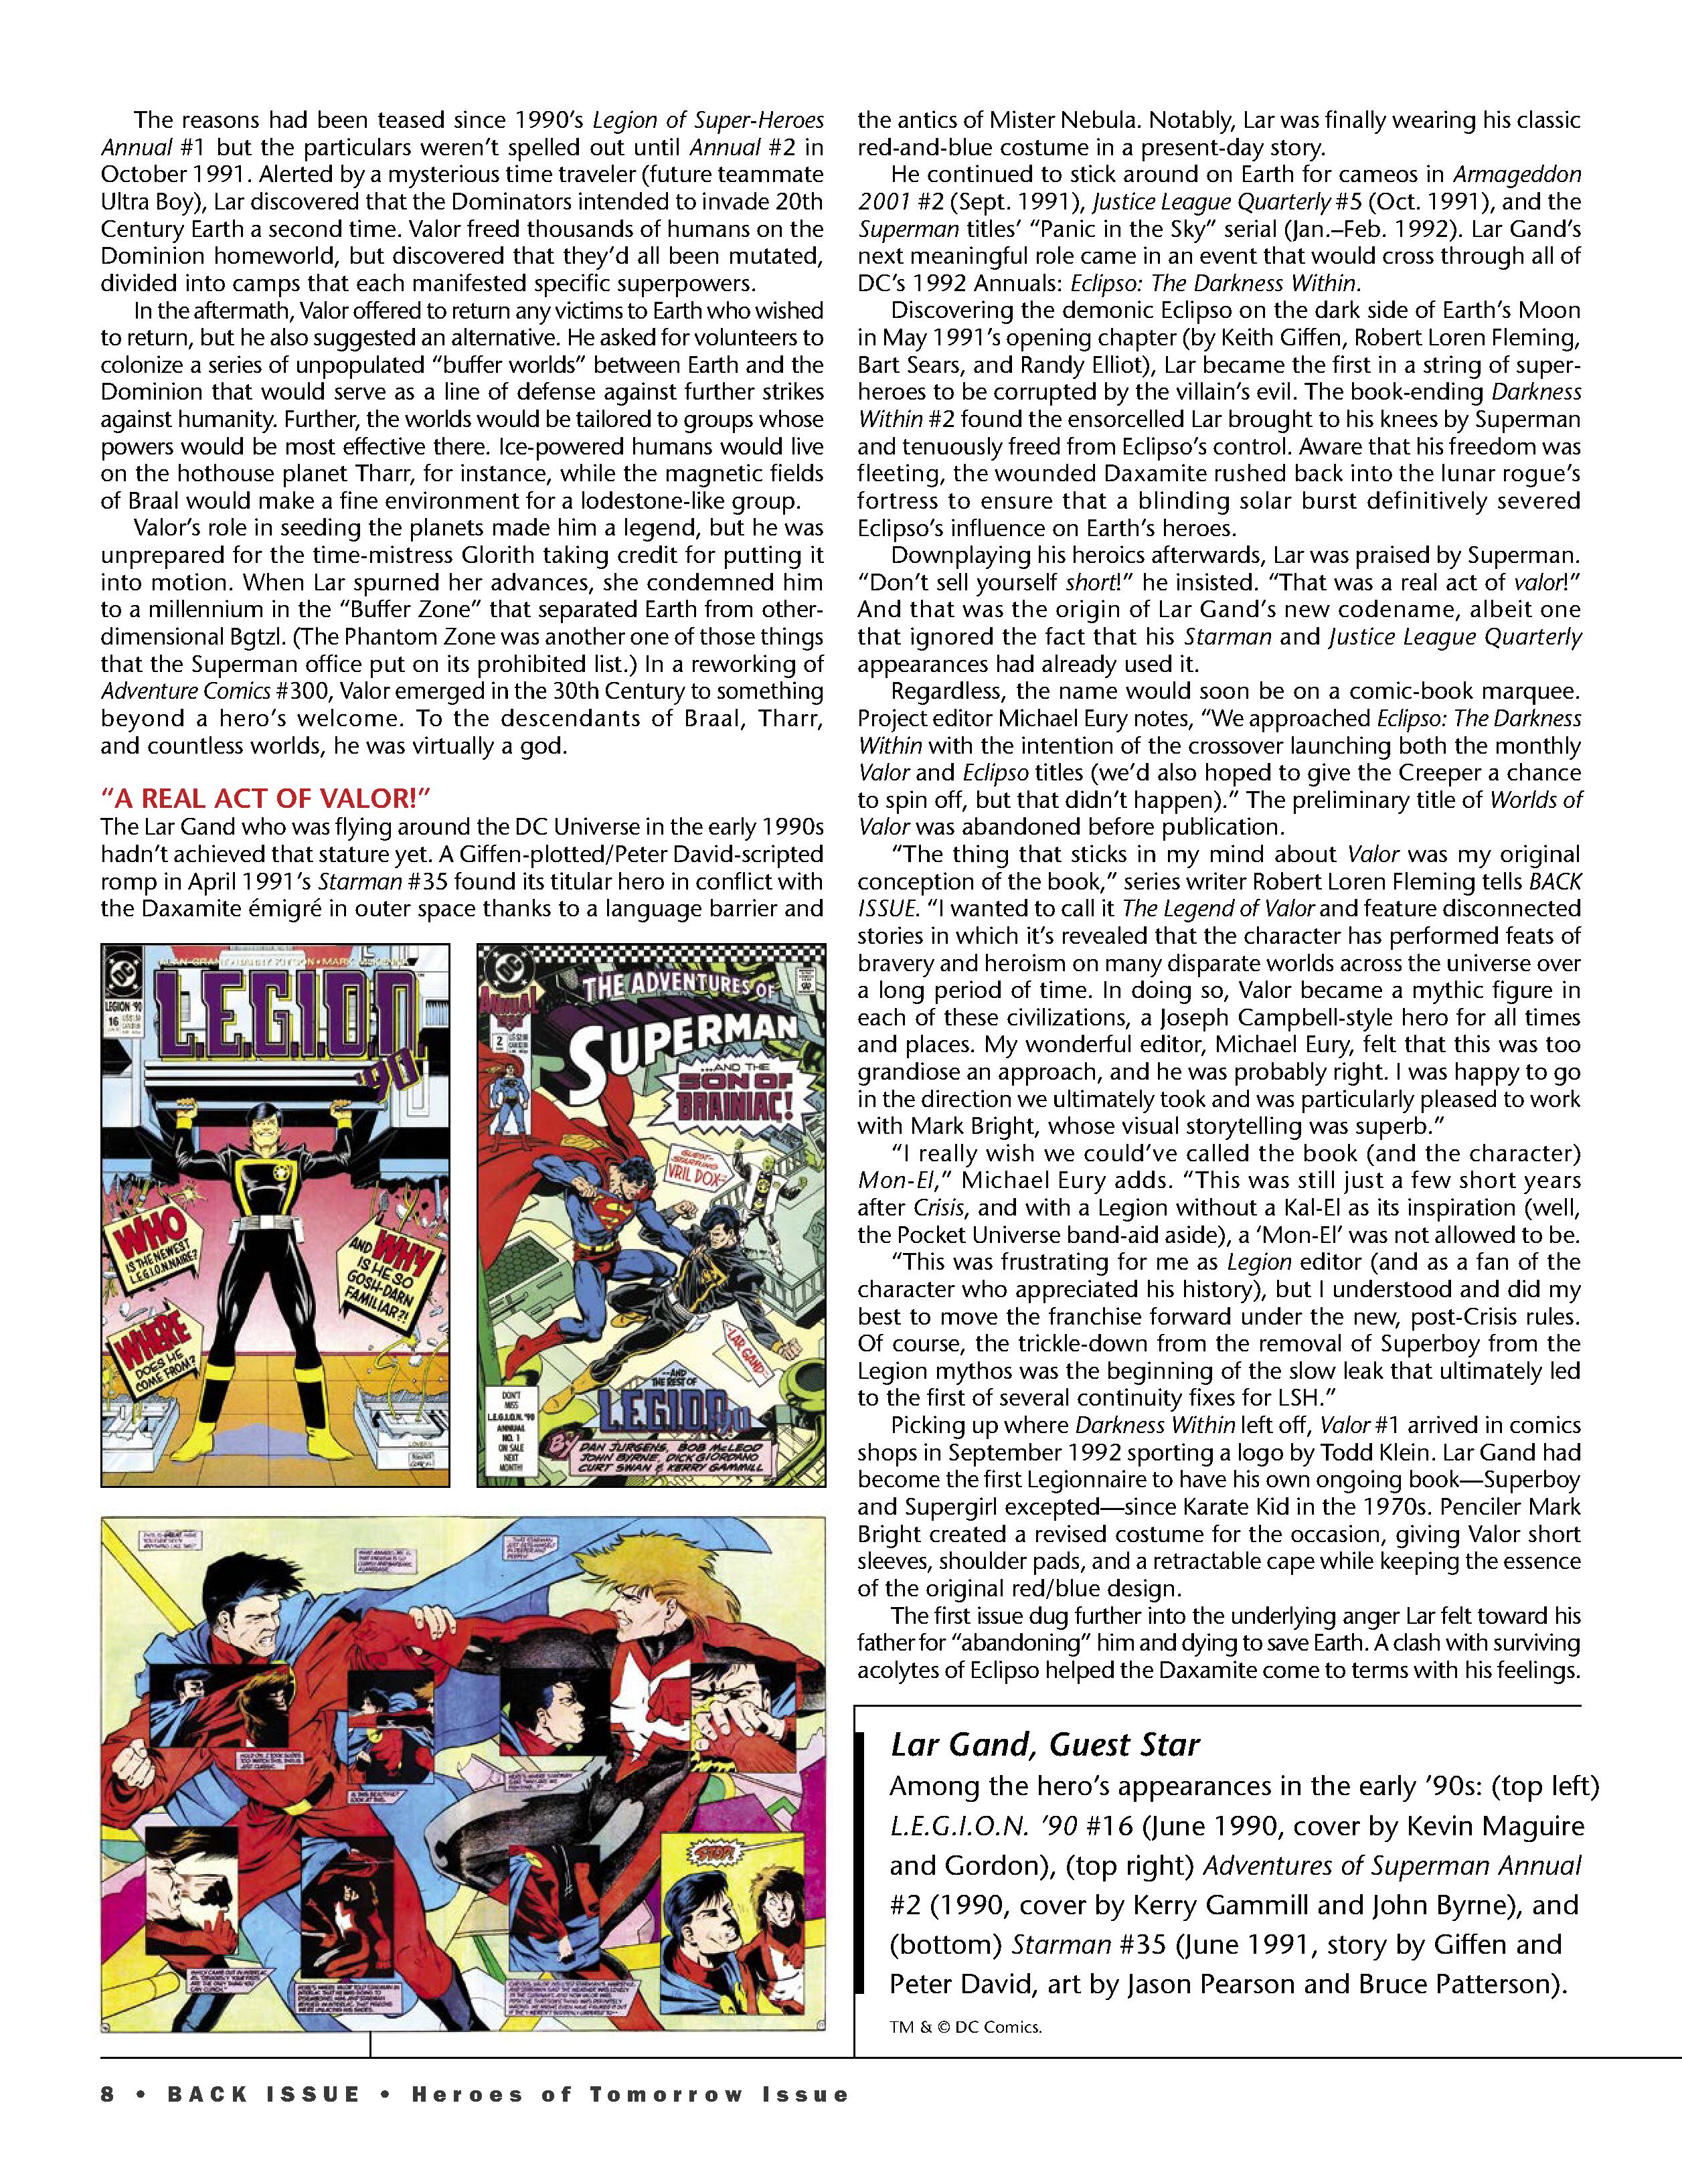 Read online Back Issue comic -  Issue #120 - 10